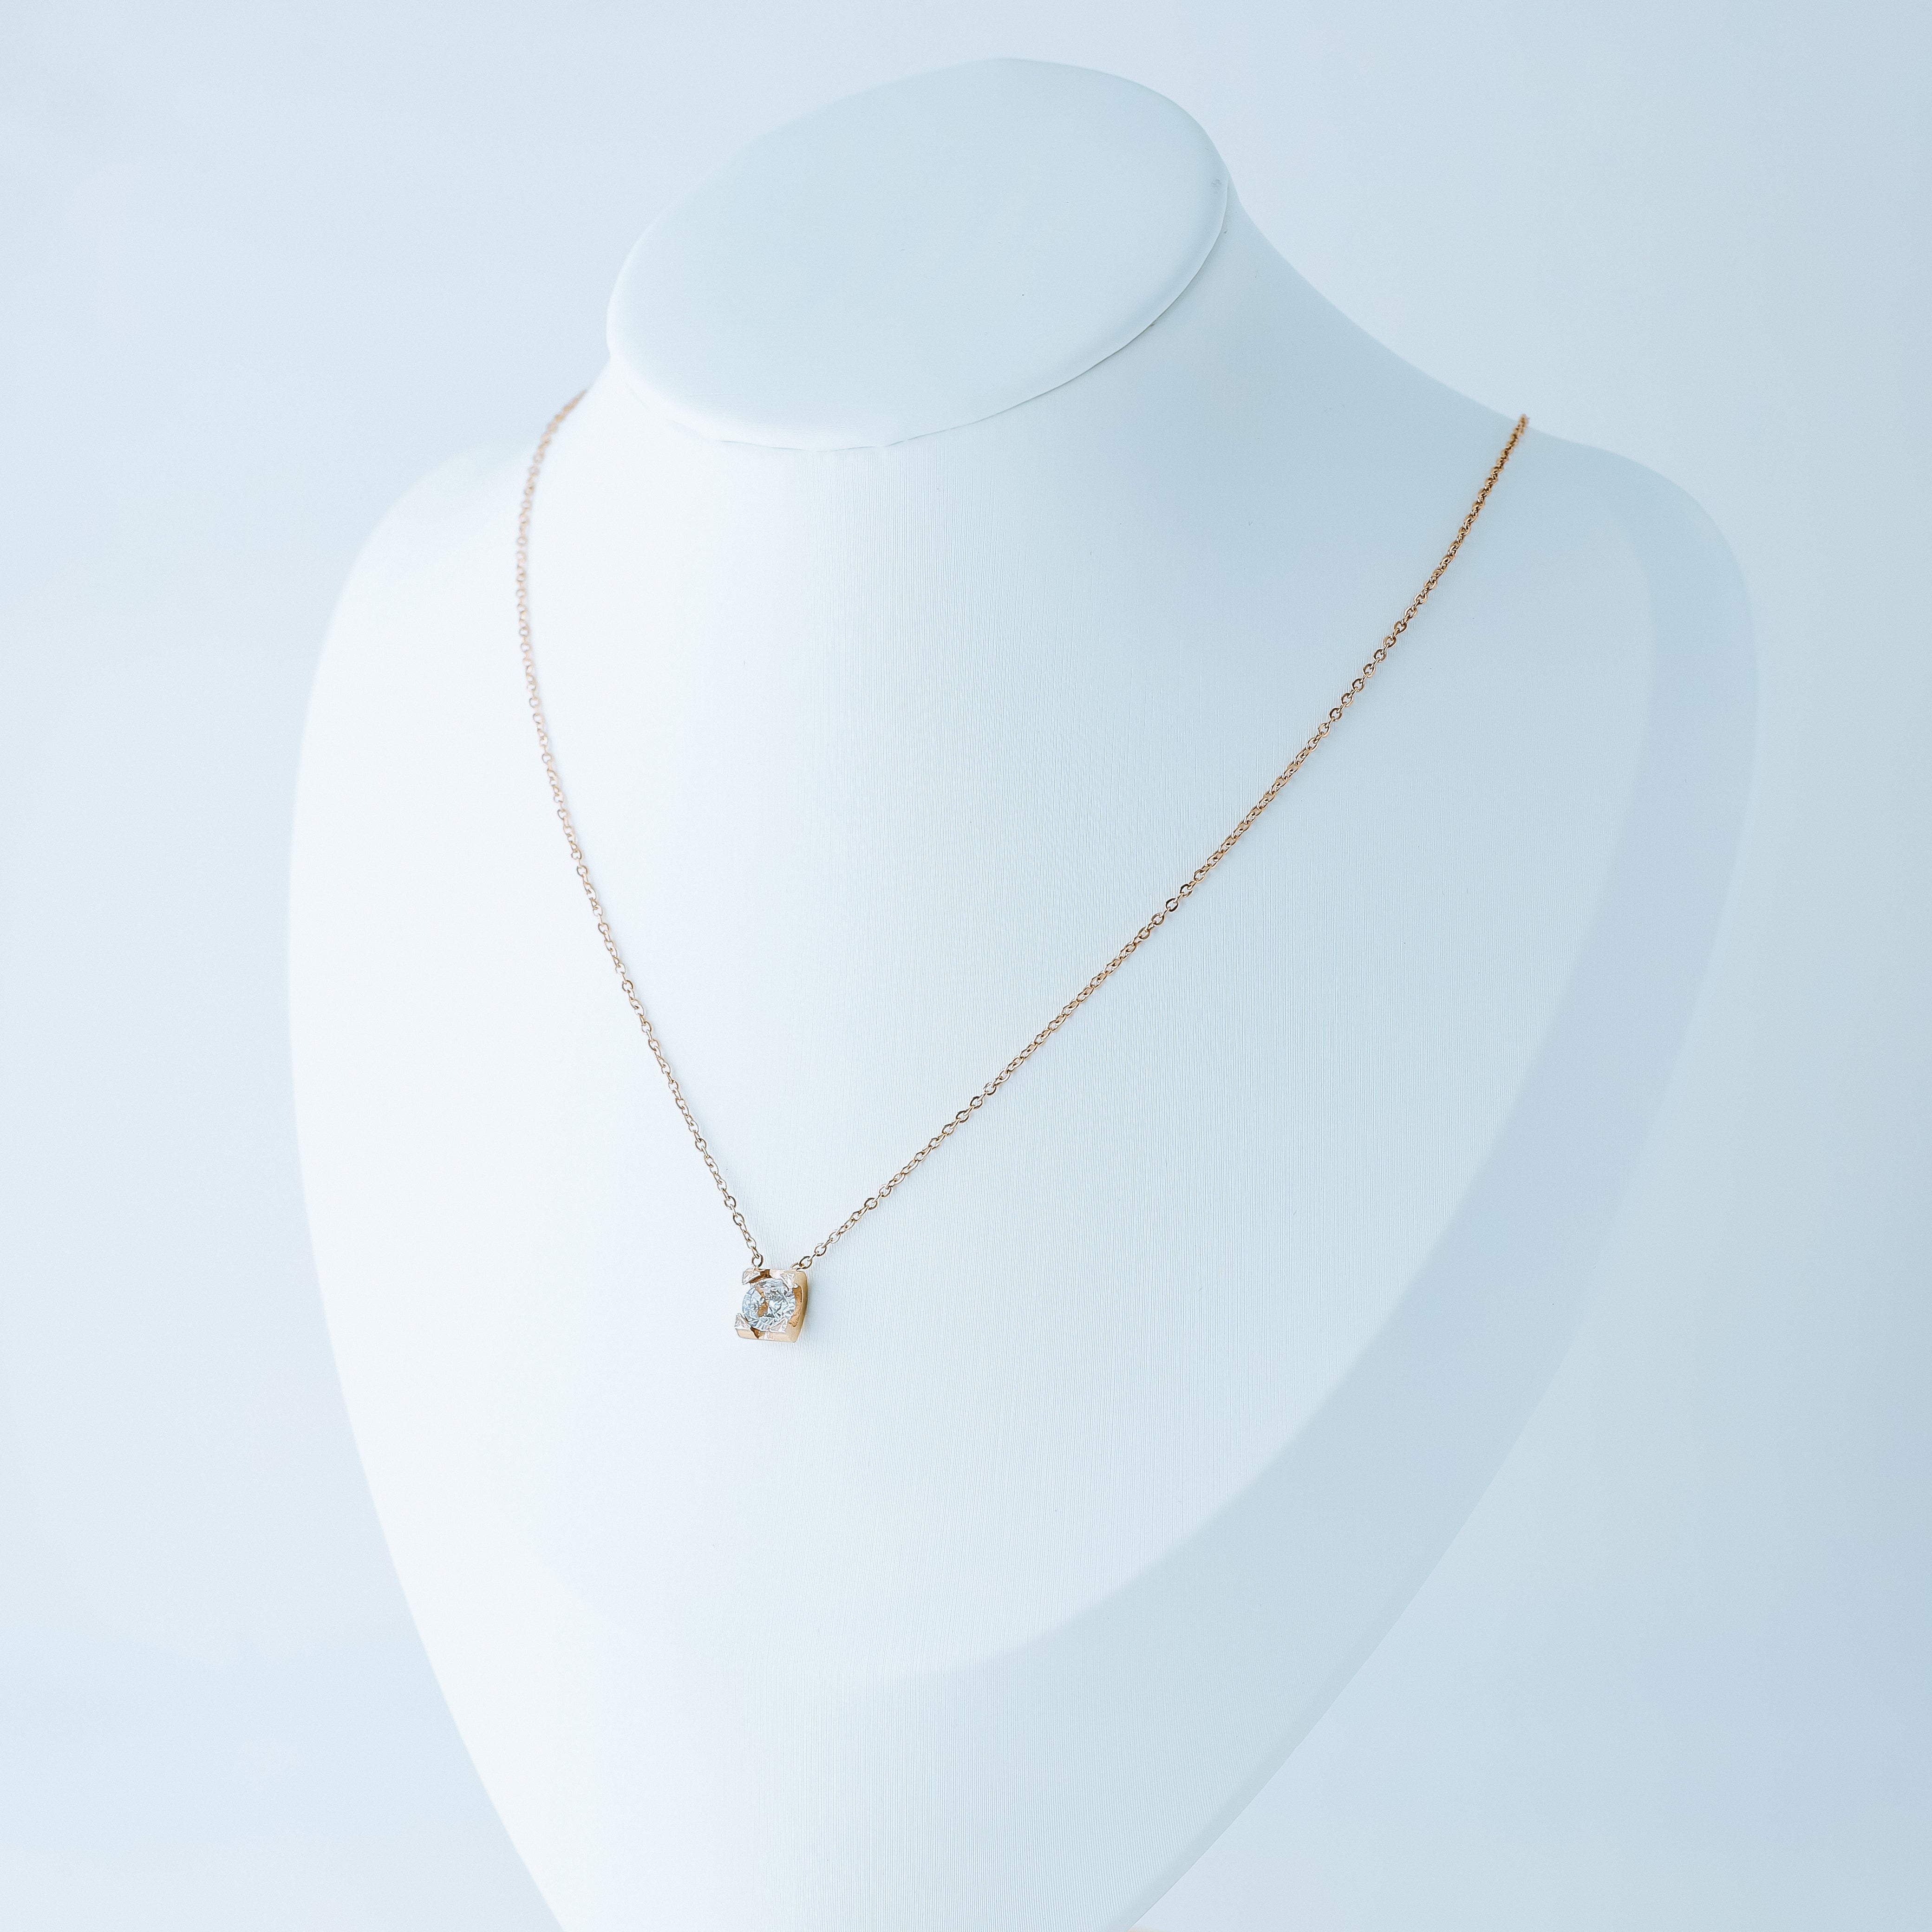 Minimalist Diamond Necklace 14K Solid Gold 4 Prong 2.5 to 5.0mm Brilliant  Cut CZ Diamond Bridesmaid Gift Dainty Necklace BN3004 - Etsy